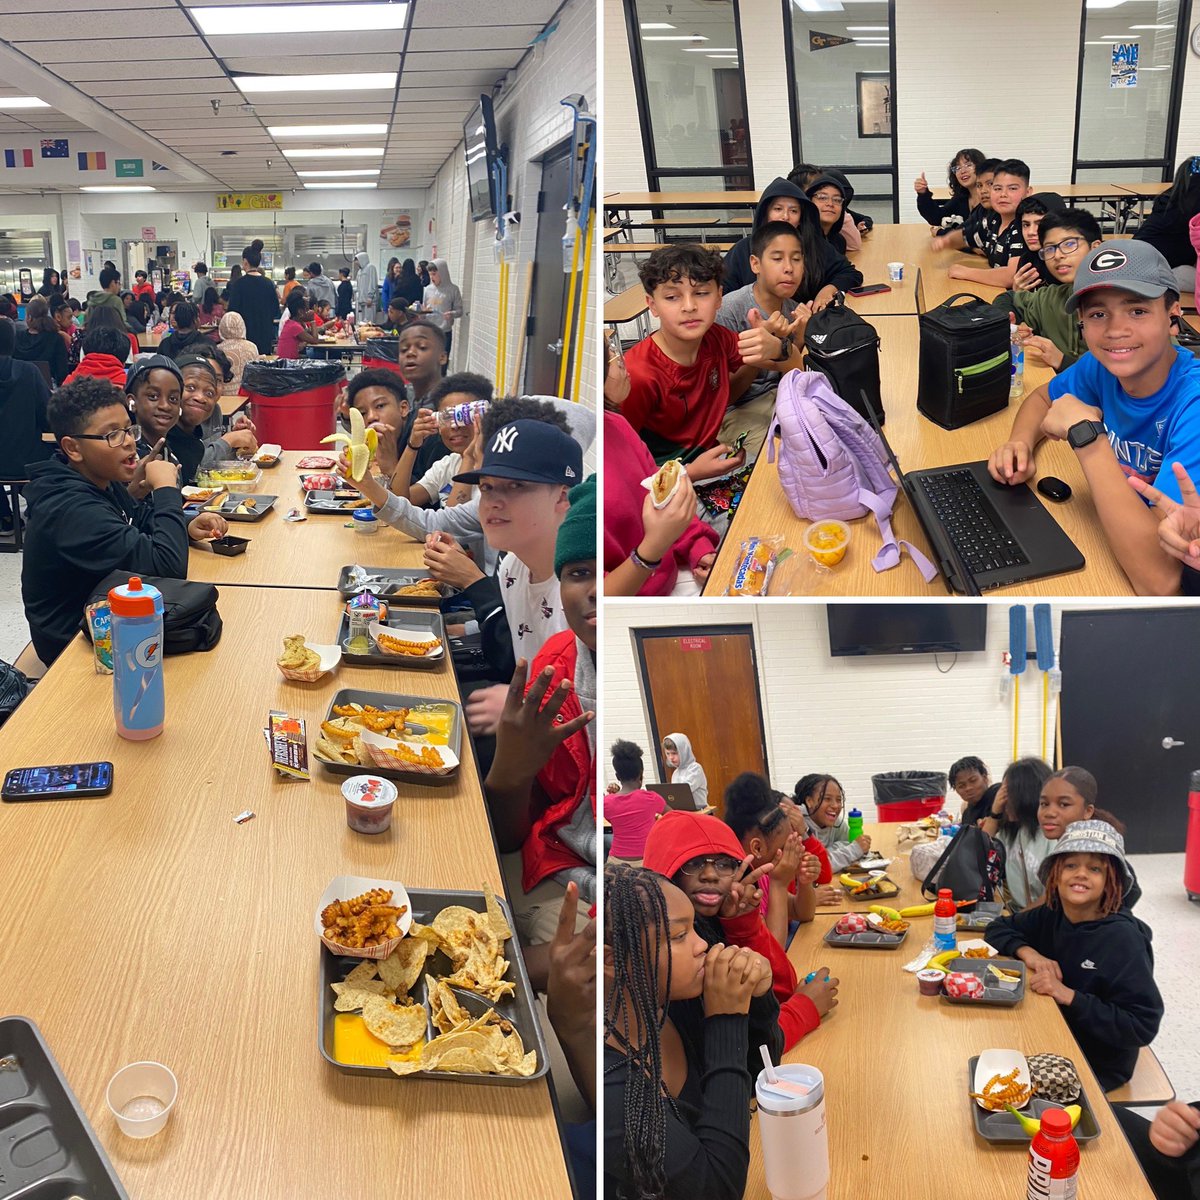 “We earned it” Wednesday! 6th graders with no demerits earned free seating today! 180 students rewarded for Being Respectful, Responsible, and Kind! @HolcombBridgeMS @FultonCoSchools